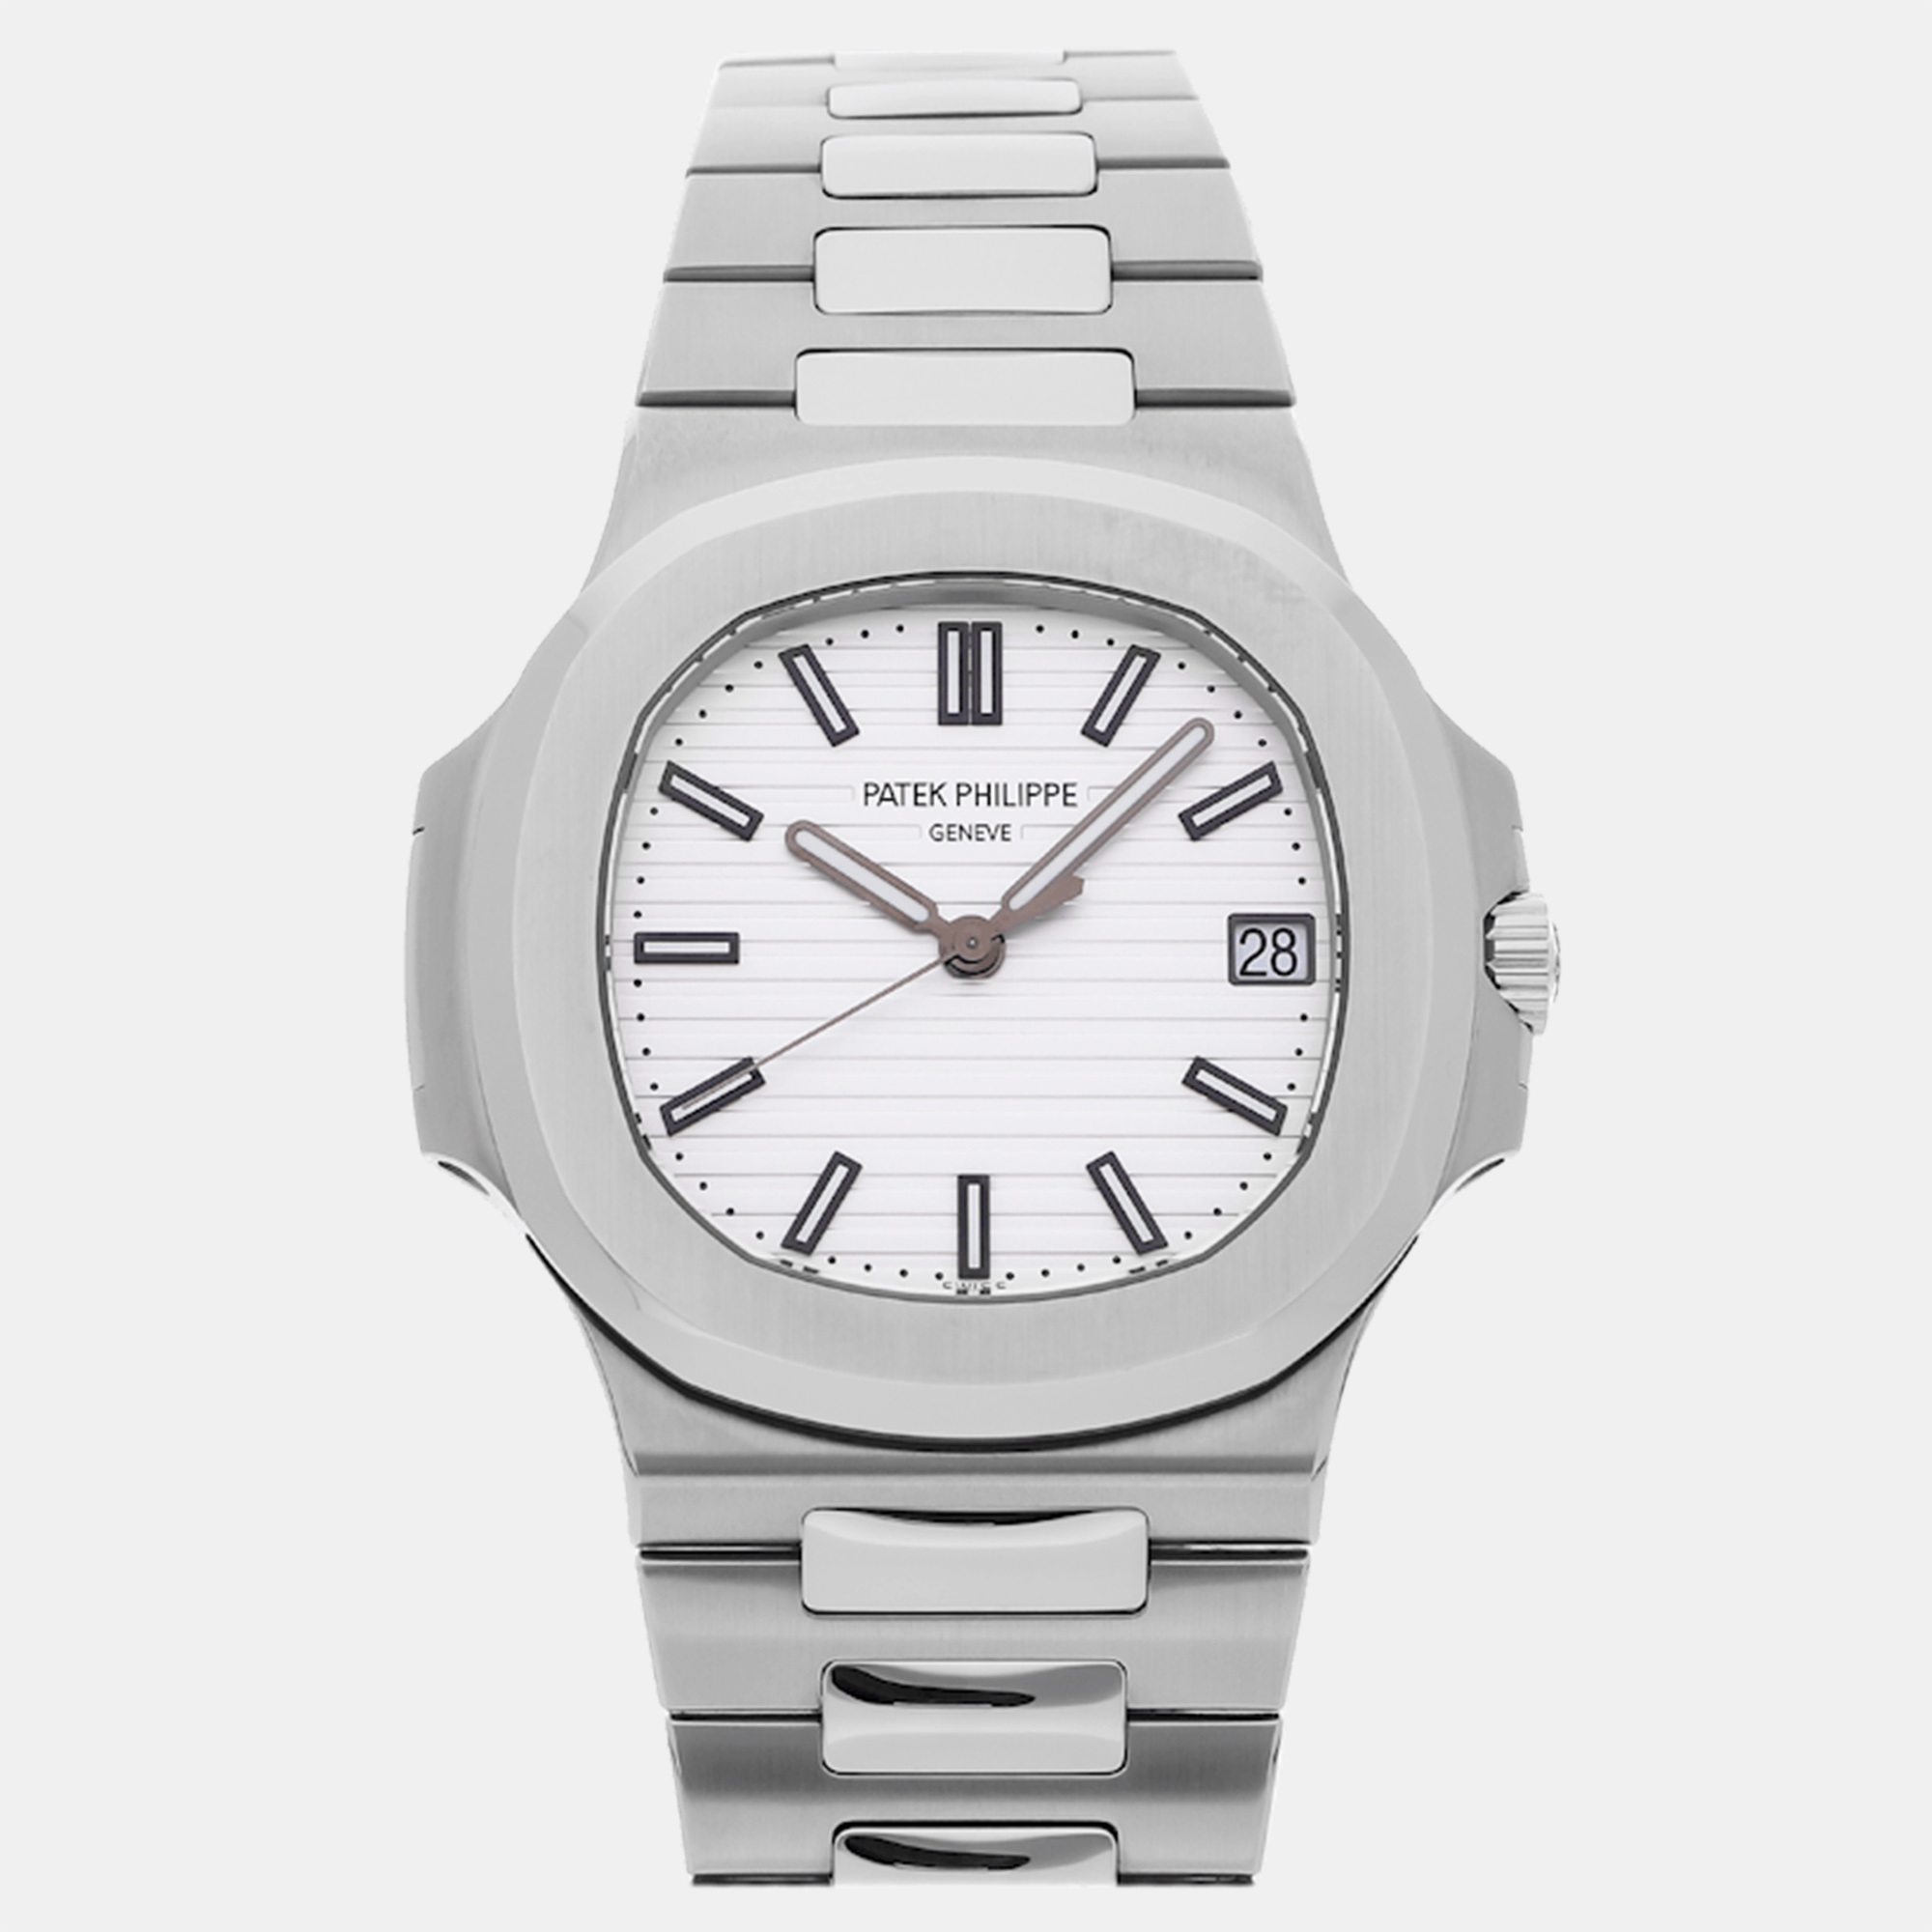 Patek philippe white stainless steel nautilus 5711/1a-011 automatic men's wristwatch 40 mm